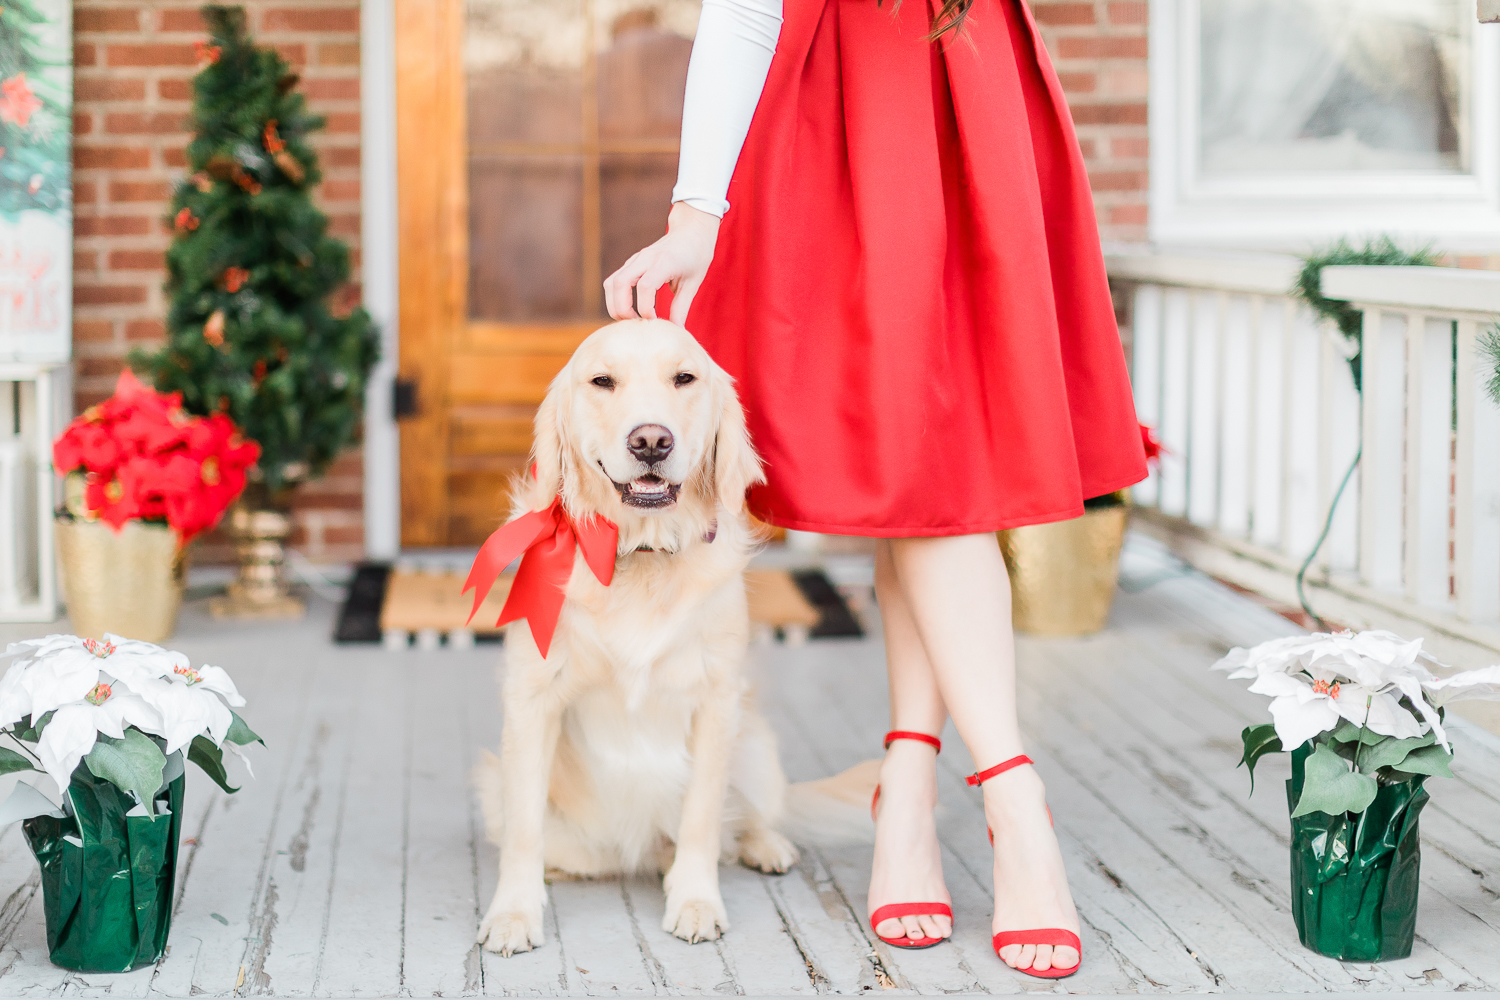 golden retriever with red bow, Amazon red bow skirt, Amazon red block heel sandals, popular affordable fashion blogger Stephanie Ziajka, popular affordable fashion blog Diary of a Debutante